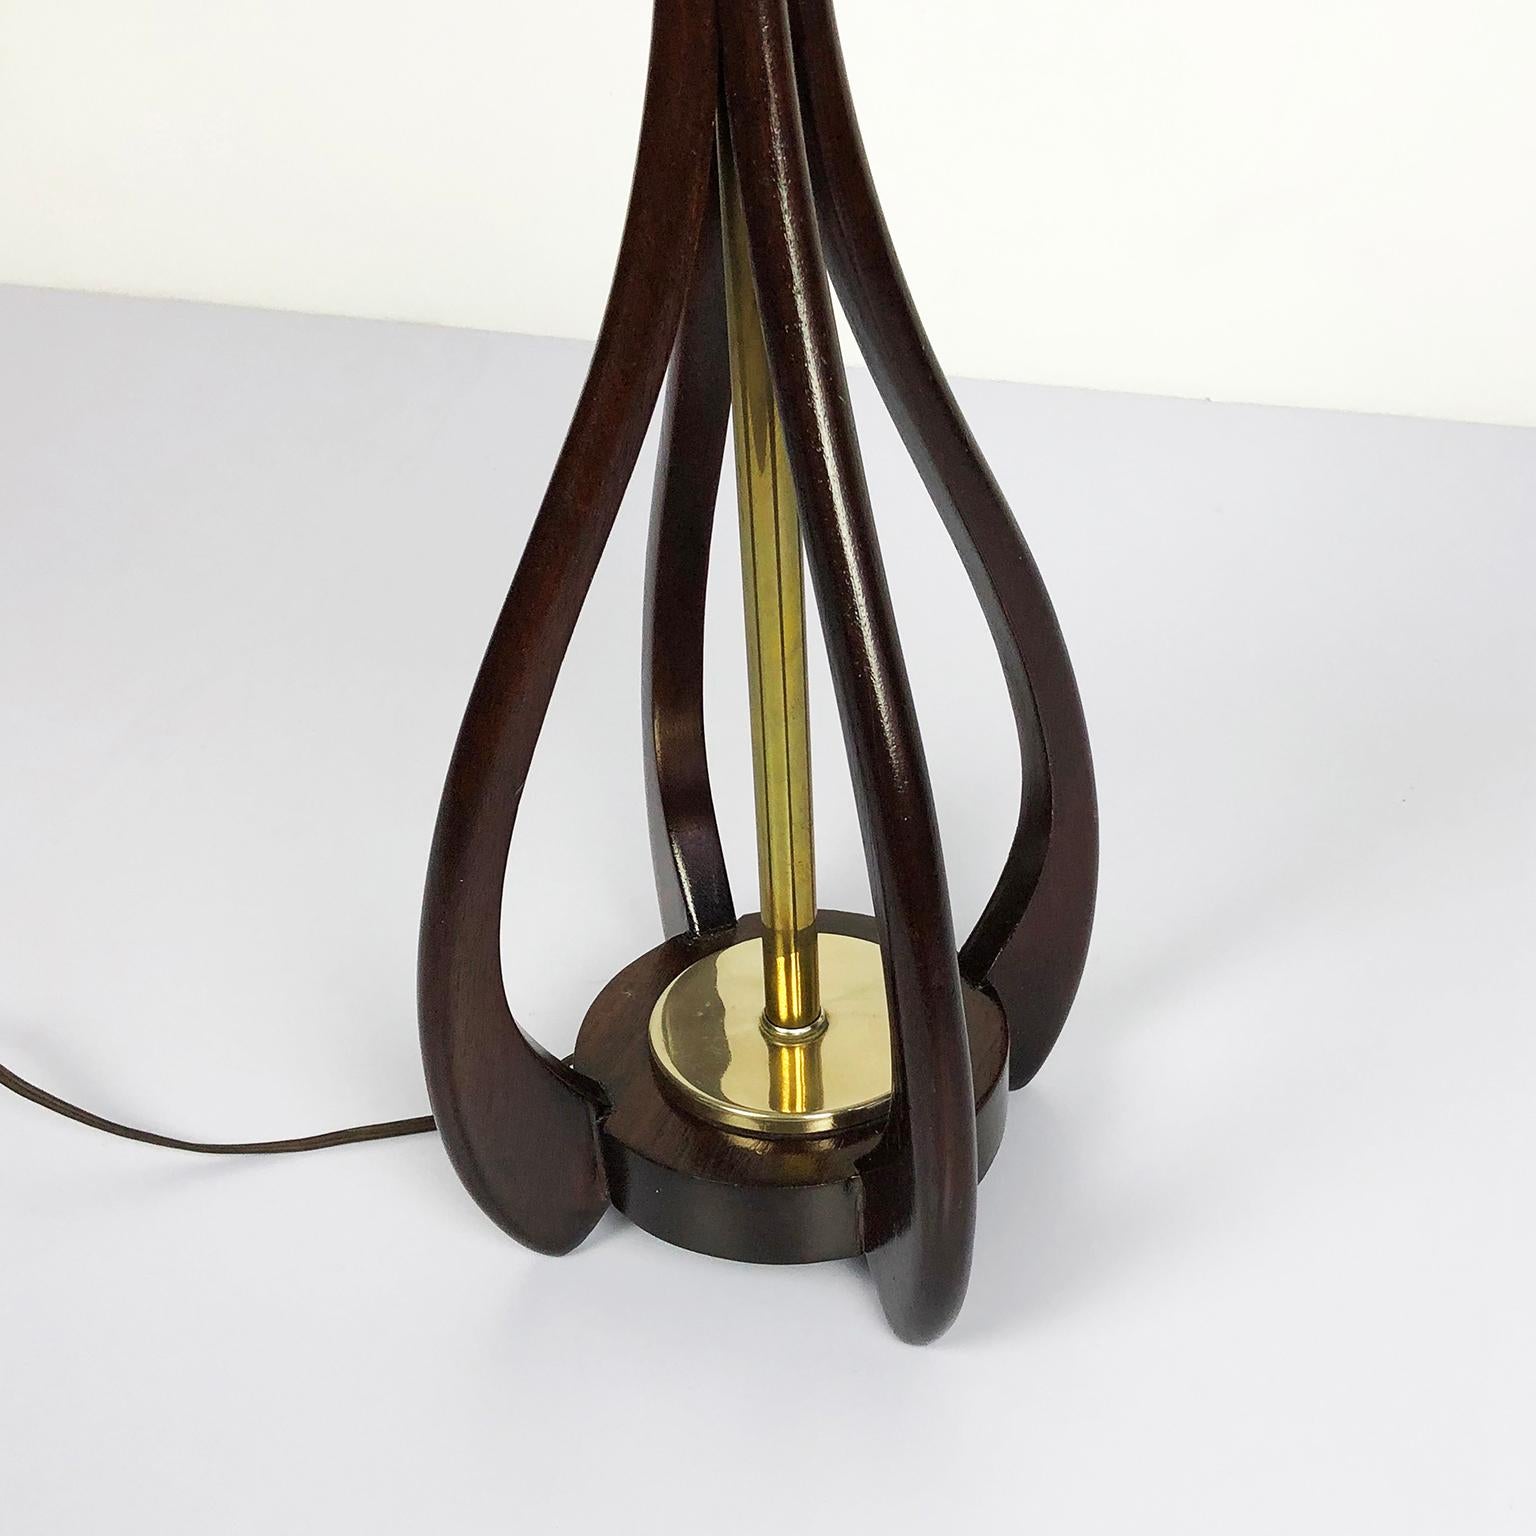 We offer this fantastic mid century mexican table lamp in mahogany wood and brass details, recently restored, circa 1960.